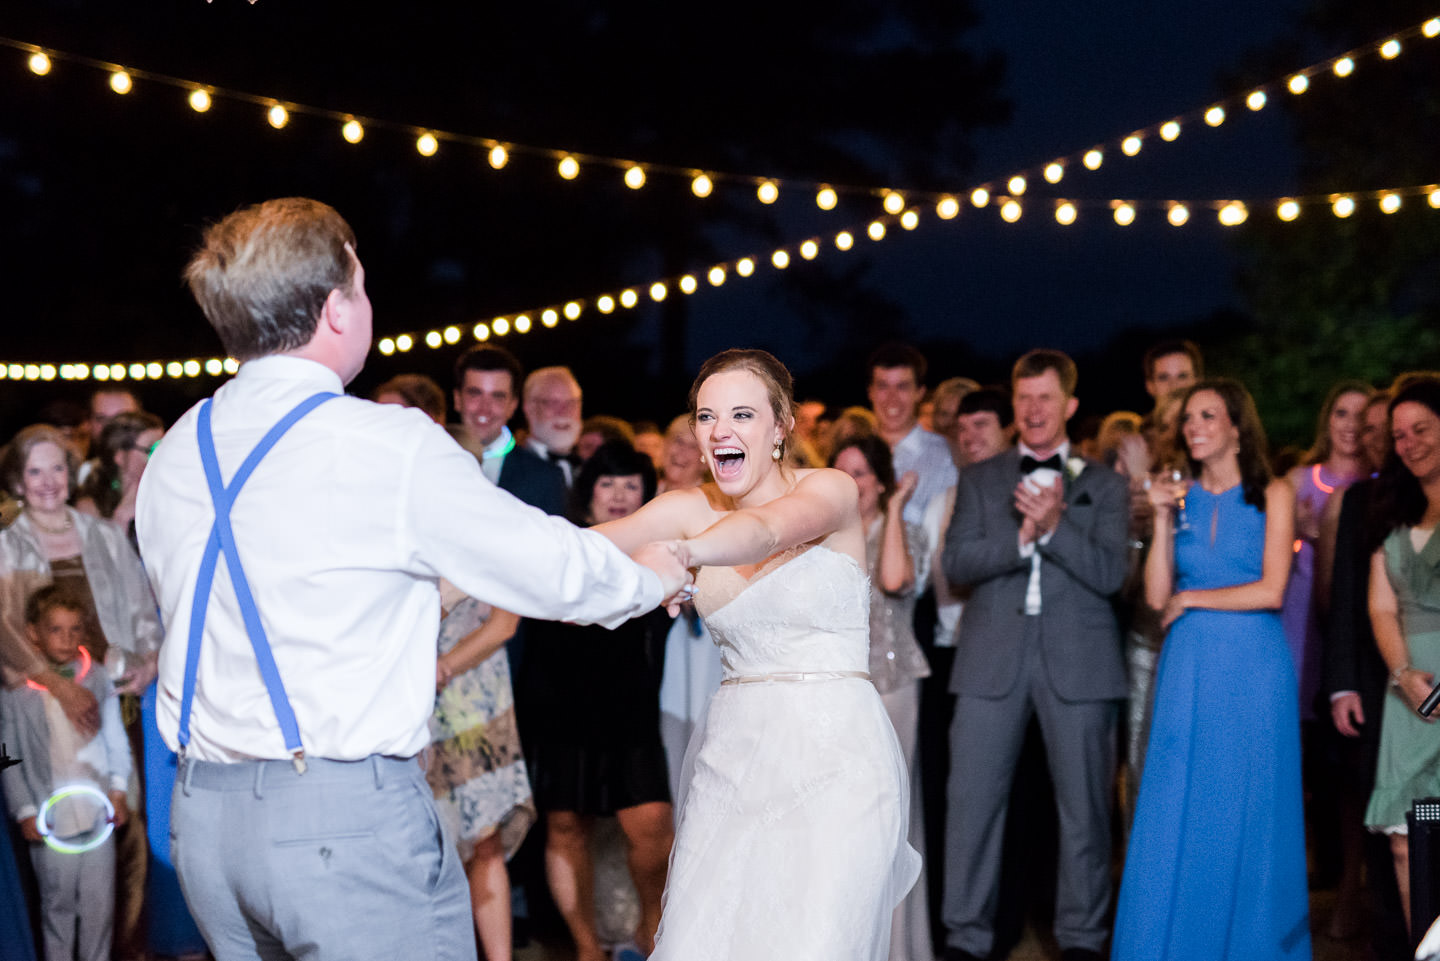 Bride and groom's joyful first dance under cafe lights while guests watch during Jackson, Mississippi outdoor wedding reception